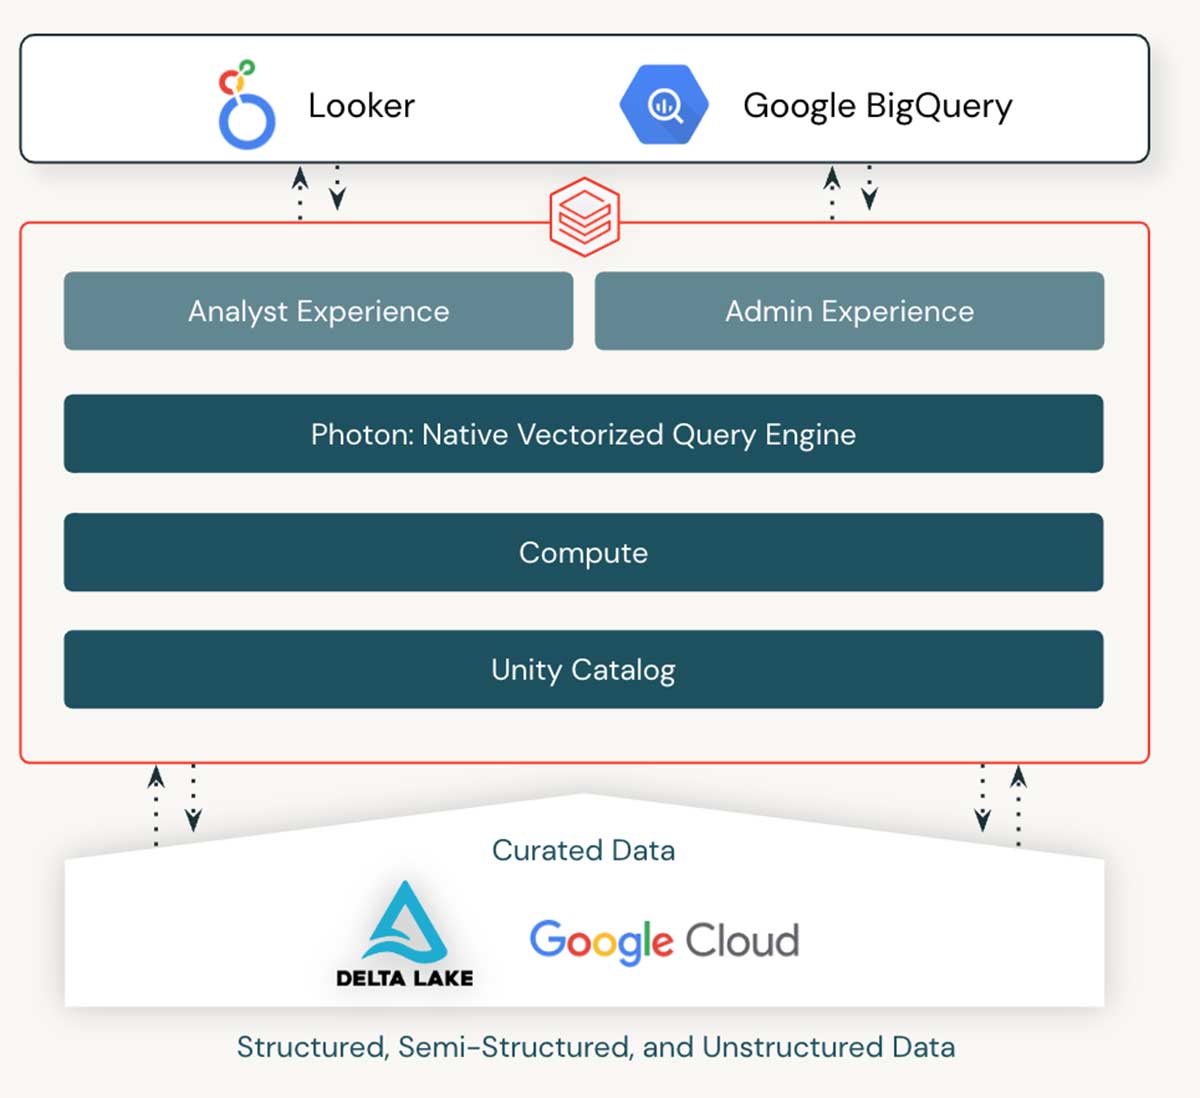 With Databricks on Google Cloud you have all the capabilities needed to run data warehousing and analytics workloads on the Databricks Lakehouse Platform